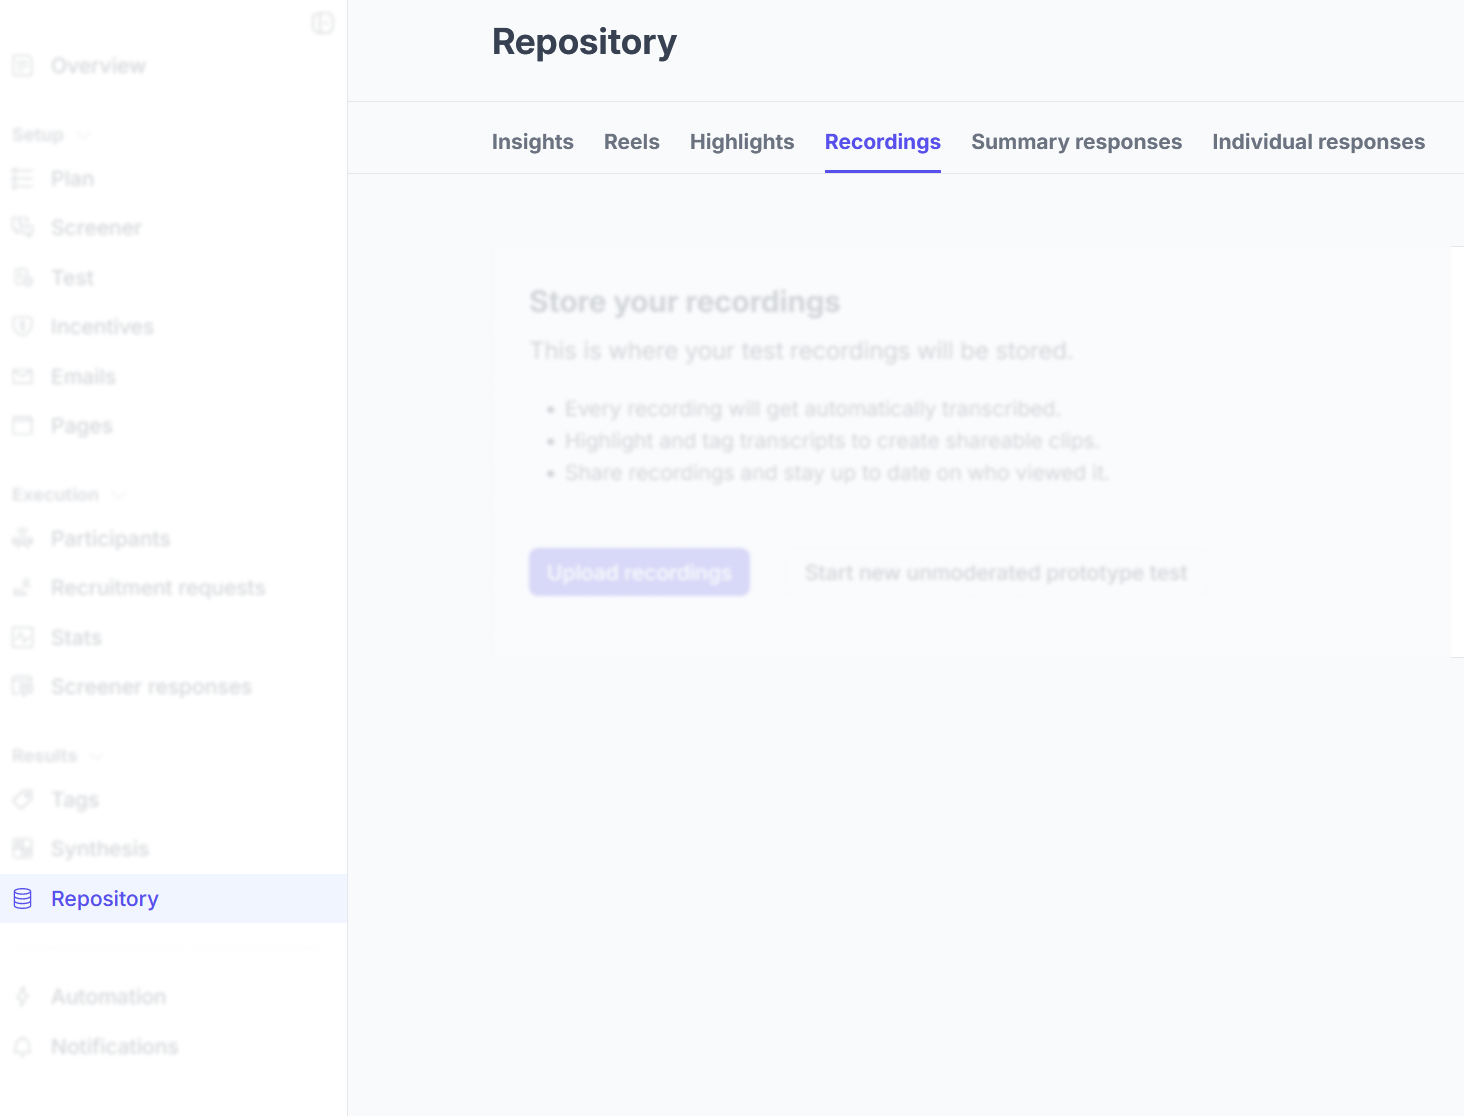 Unmoderated repository view